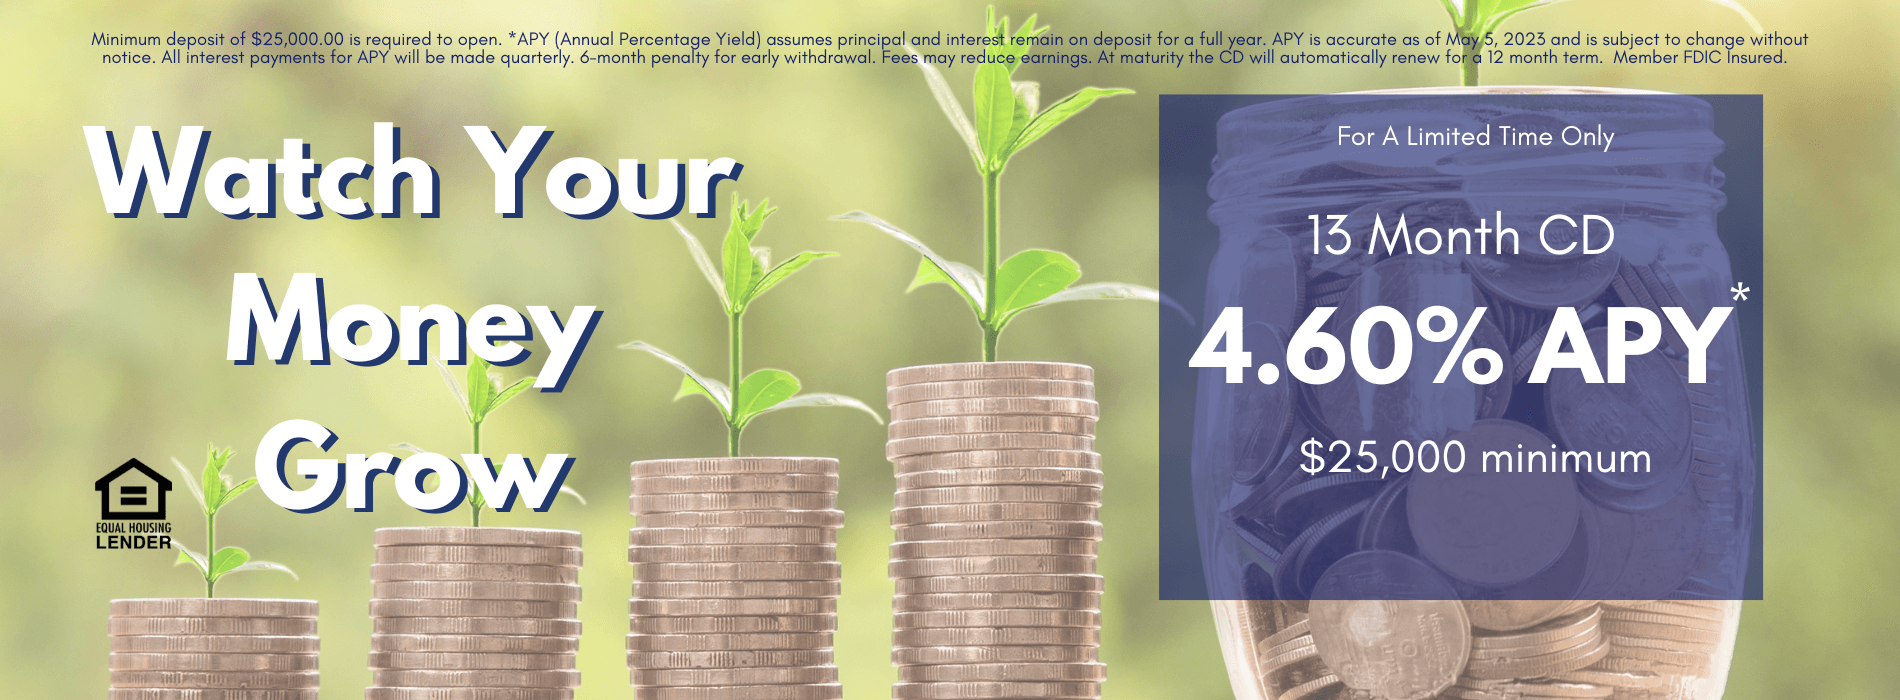 Watch Your Money Grow! For a limited time only, we are offering a 13 month CD with a 4.60% Annual Percentage Yield. Minimum deposit of $25,000.00 is required to open. *APY (Annual Percentage Yield) assumes principal and interest remain on deposit for a full year. APY is accurate as of May 5, 2023 and is subject to change without notice. All interest payments for APY will be made quarterly. 6-month penalty for early withdrawal. Fees may reduce earnings. At maturity the CD will automatically renew for a 12 month term. Member FDIC Insured.